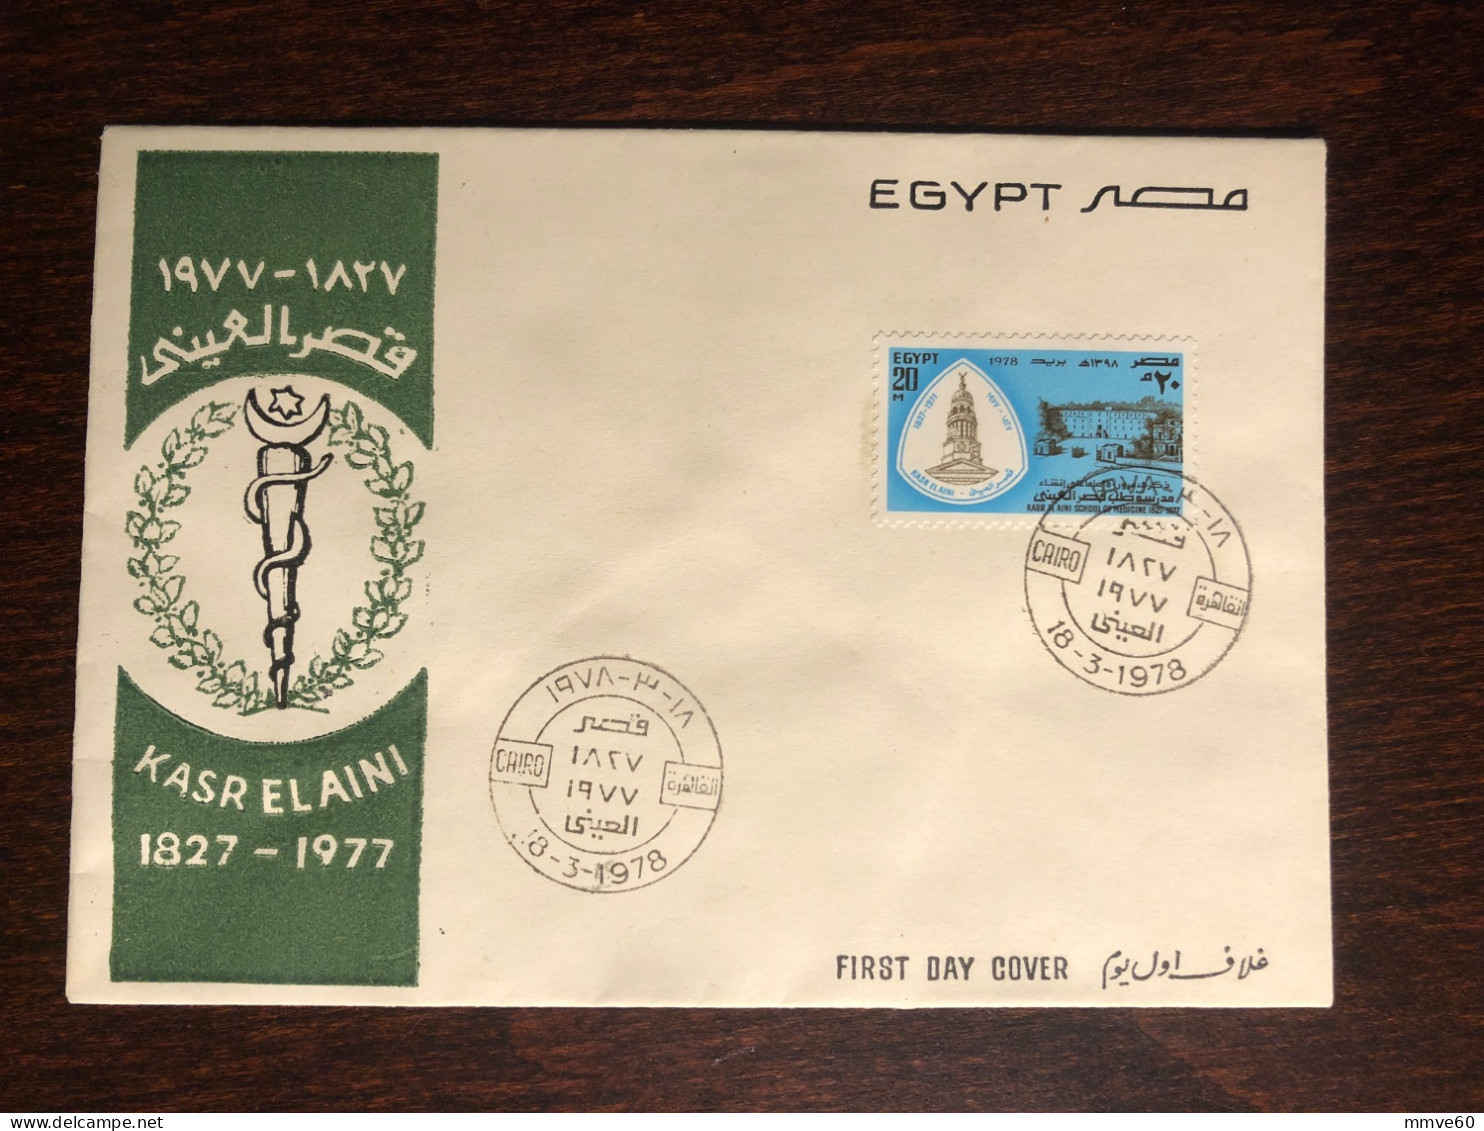 EGYPT FDC COVER 1978 YEAR MEDICAL SCHOOL HEALTH MEDICINE - Covers & Documents